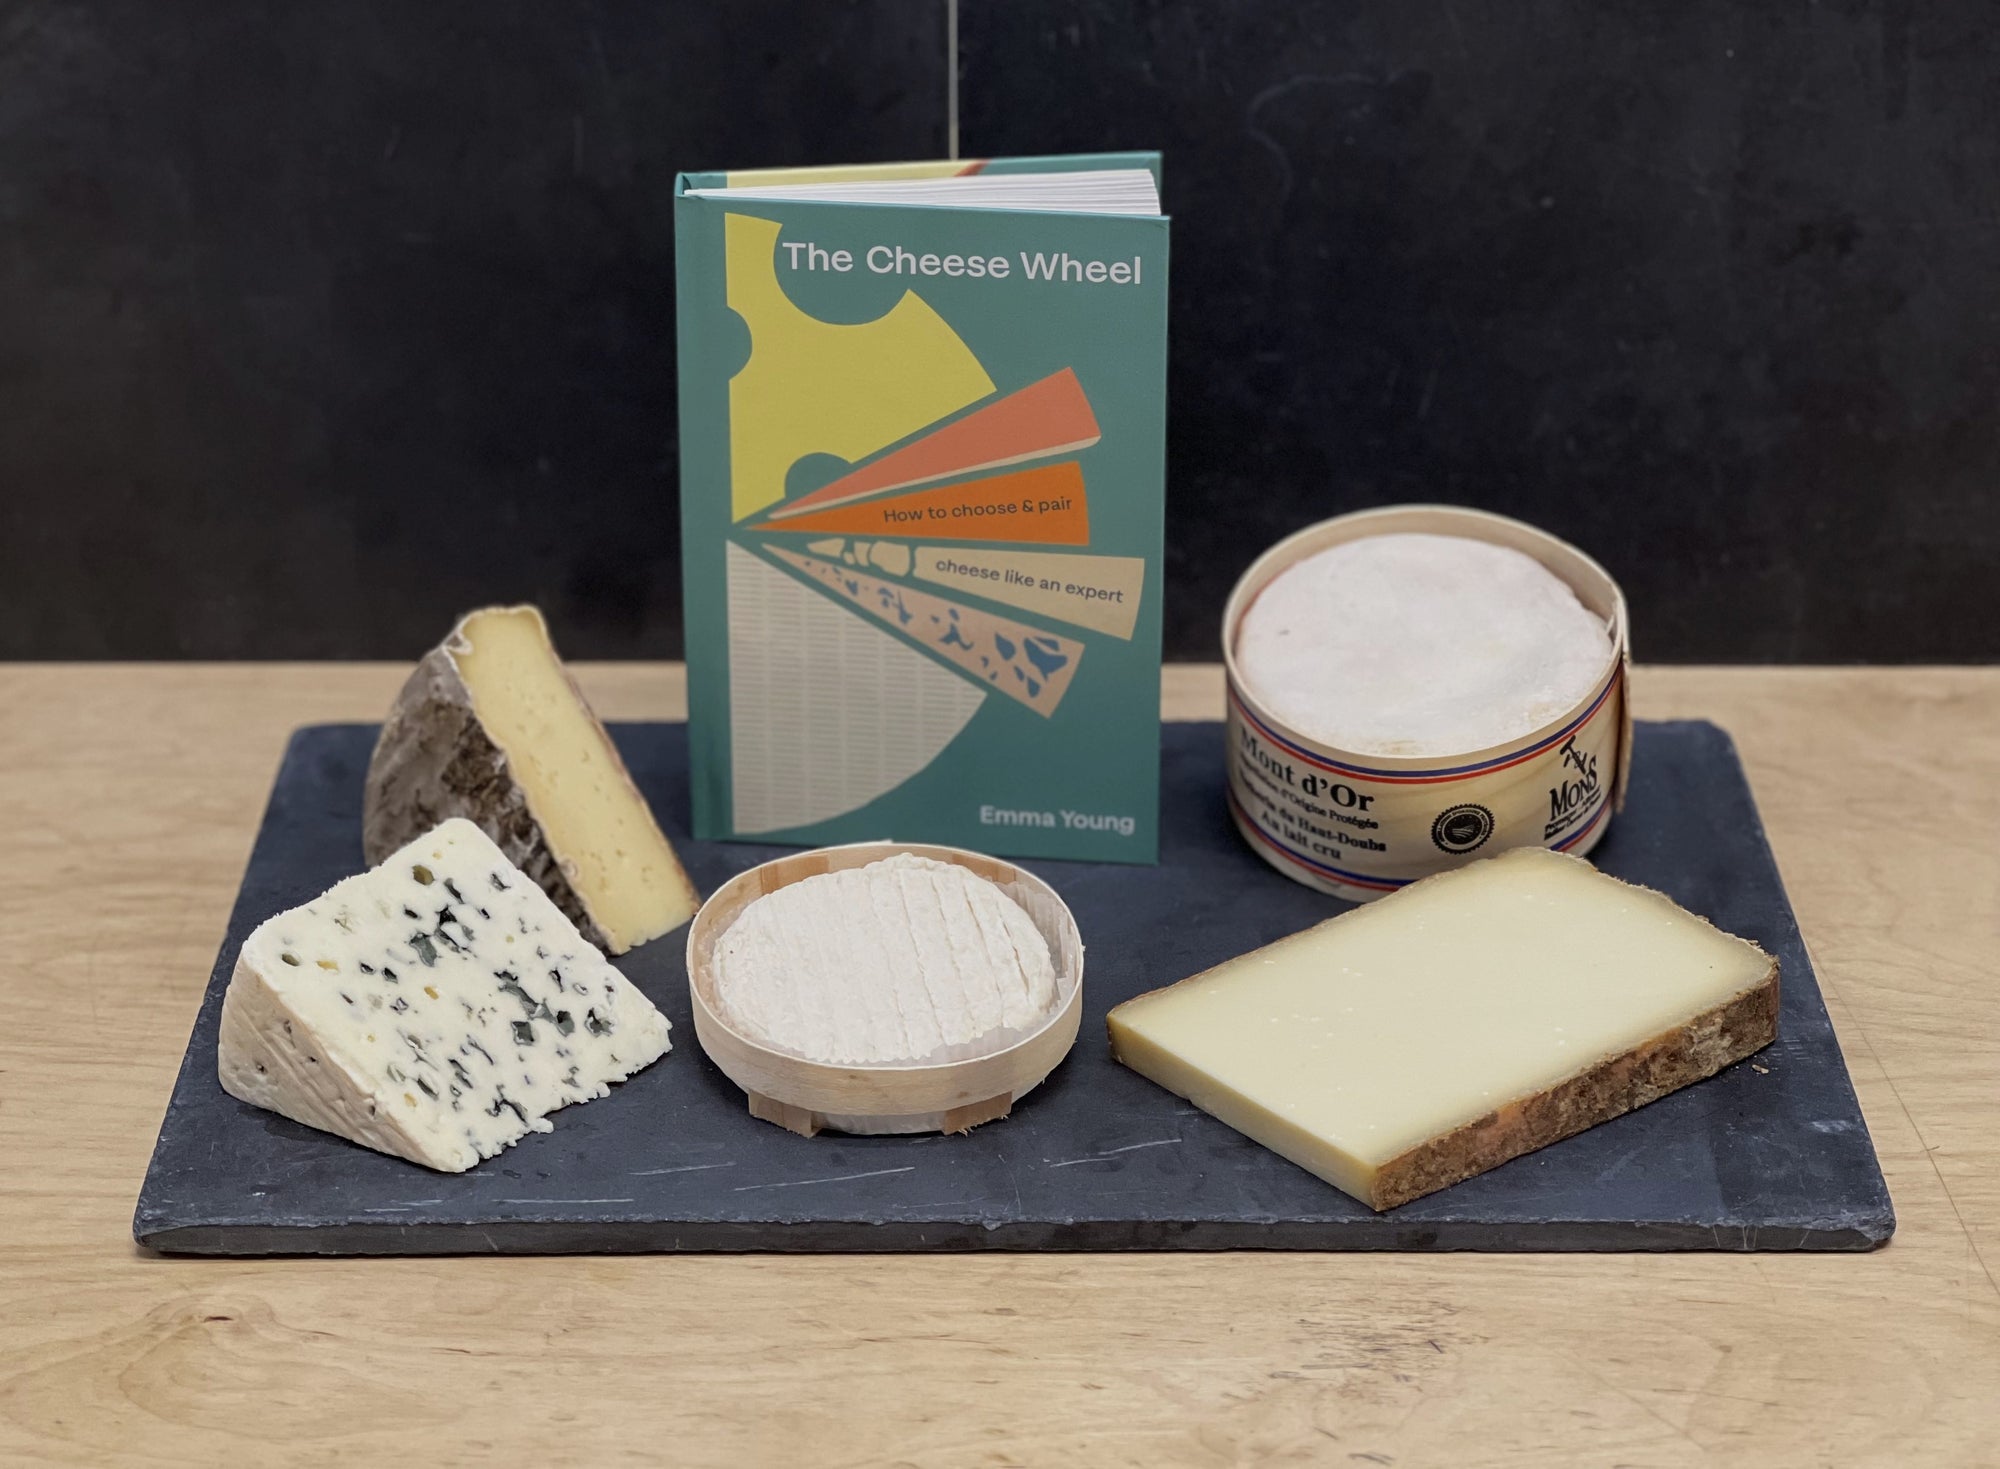 We're giving away 10 copies of The Cheese Wheel by Emma Young